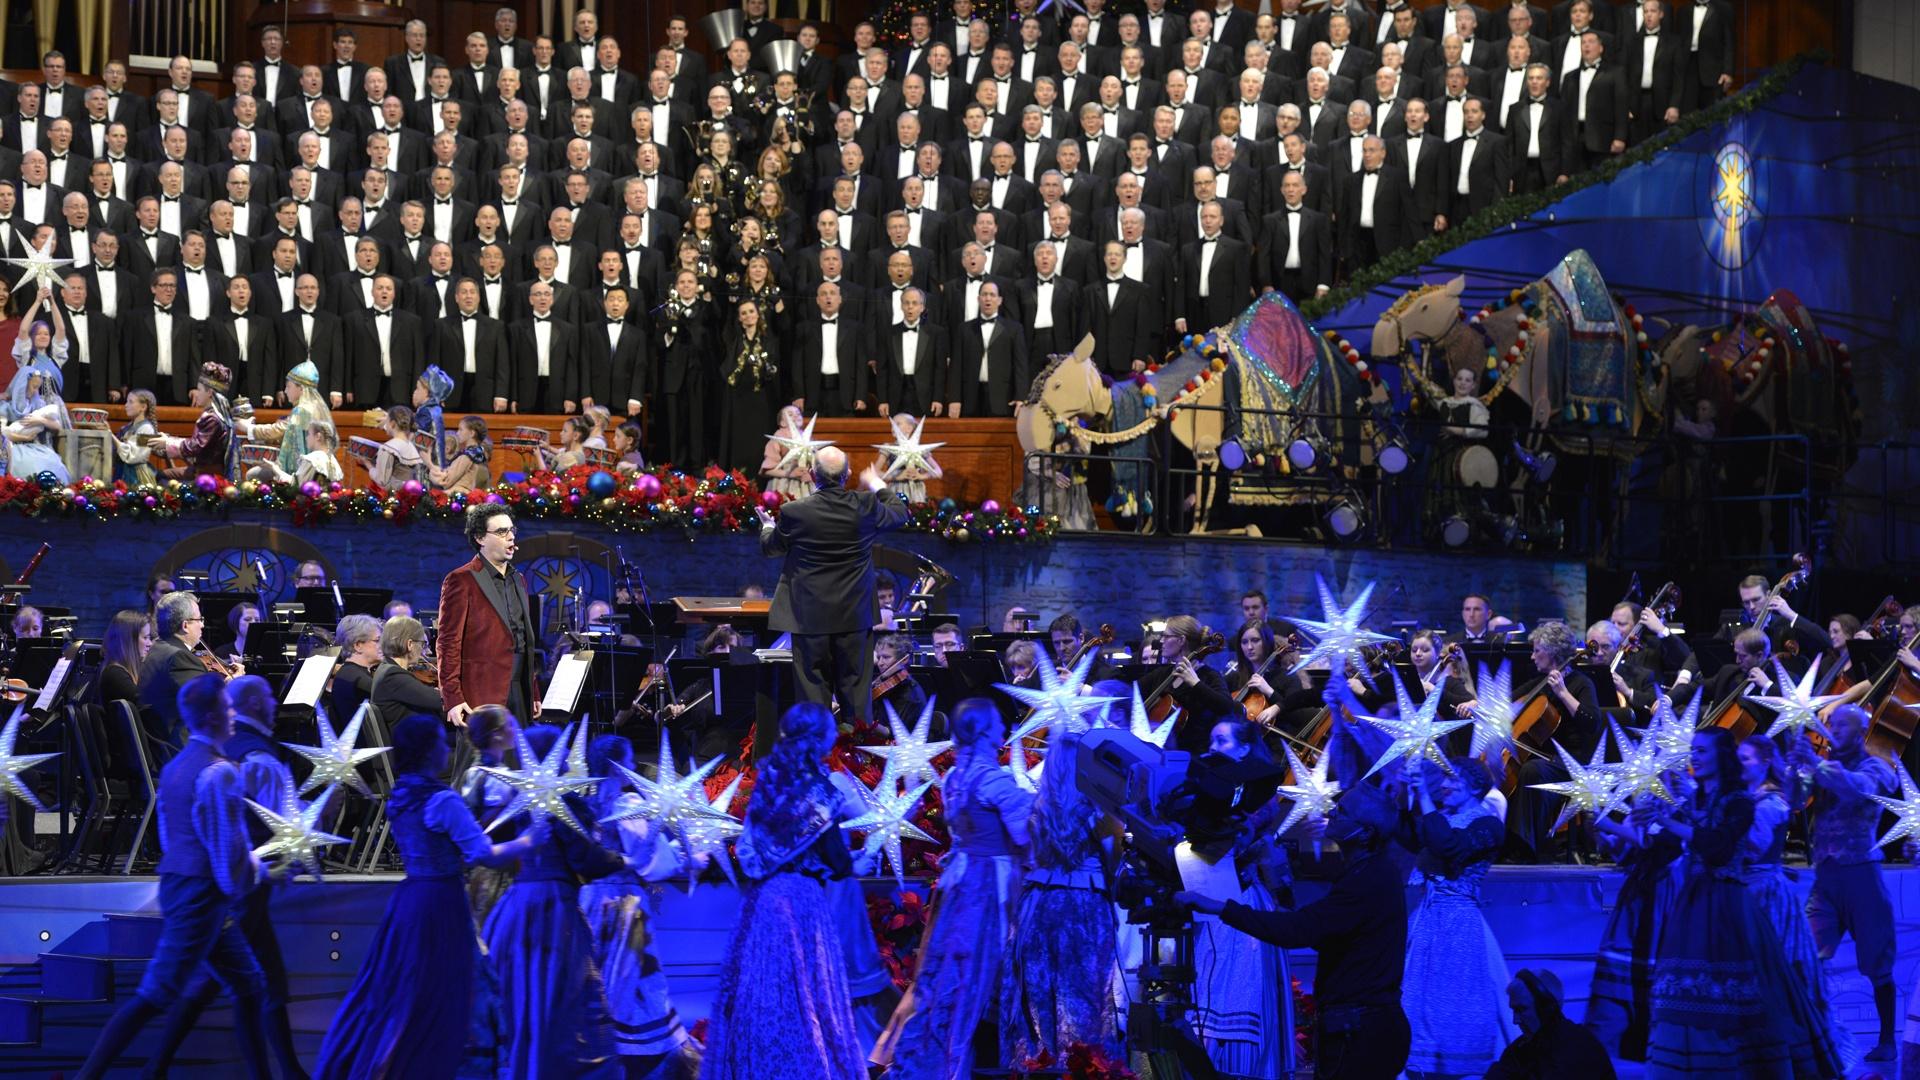 Kristin Chenoweth singing with The Tabernacle Choir behind her.